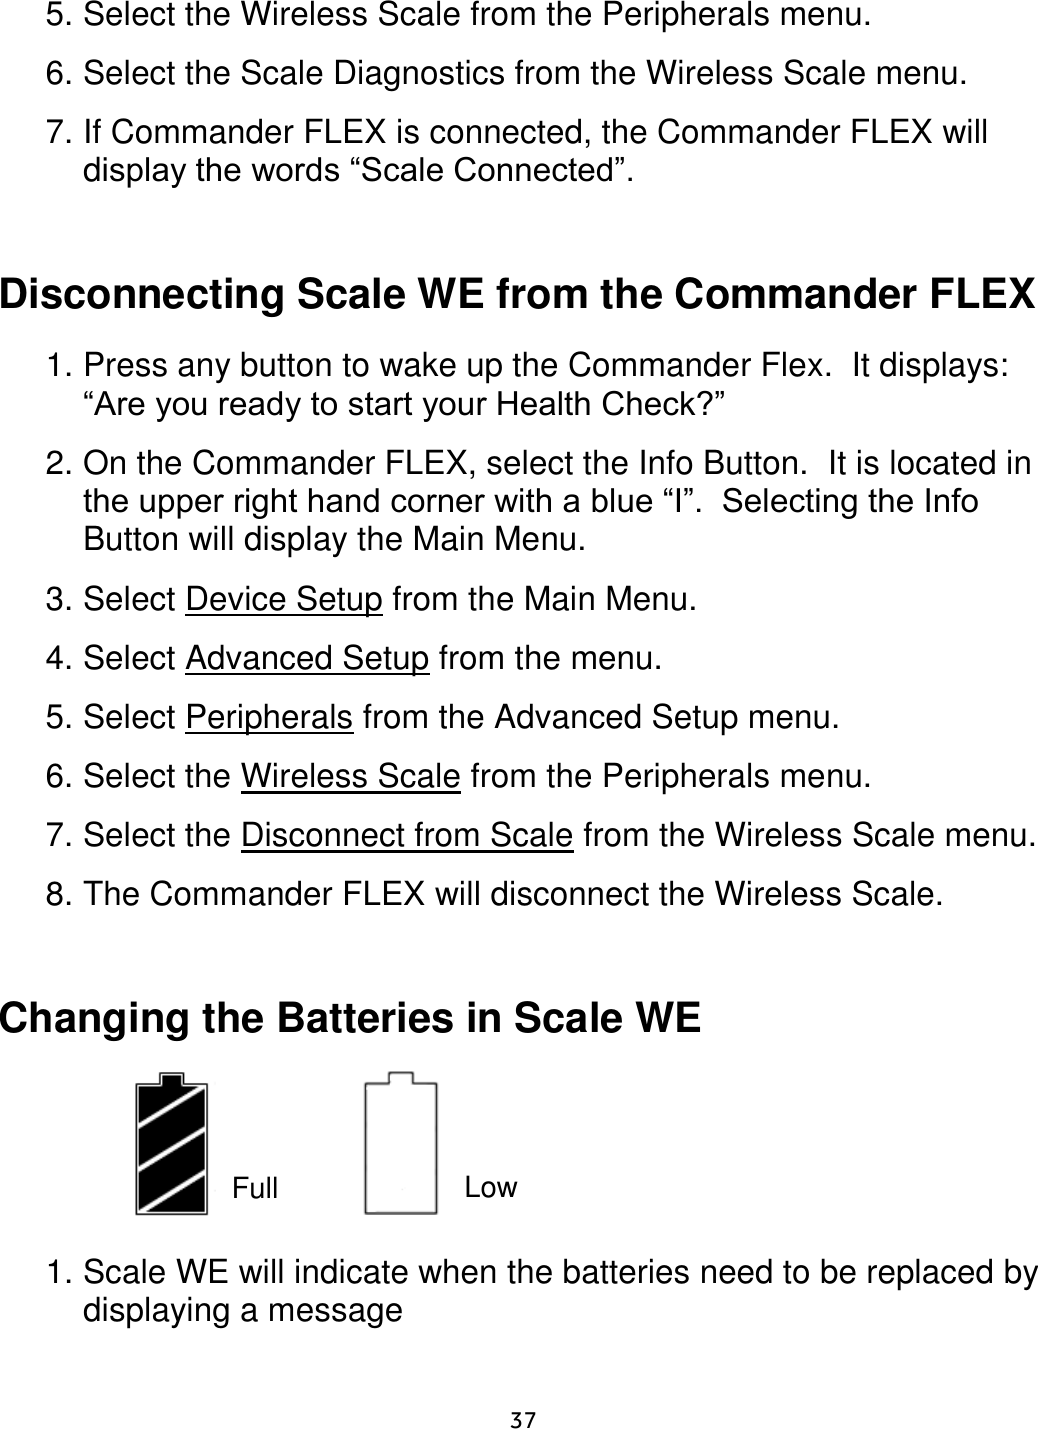     37  5. Select the Wireless Scale from the Peripherals menu.  6. Select the Scale Diagnostics from the Wireless Scale menu.  7. If Commander FLEX is connected, the Commander FLEX will display the words “Scale Connected”.    Disconnecting Scale WE from the Commander FLEX  1. Press any button to wake up the Commander Flex.  It displays:  “Are you ready to start your Health Check?”   2. On the Commander FLEX, select the Info Button.  It is located in the upper right hand corner with a blue “I”.  Selecting the Info Button will display the Main Menu. 3. Select Device Setup from the Main Menu. 4. Select Advanced Setup from the menu. 5. Select Peripherals from the Advanced Setup menu.  6. Select the Wireless Scale from the Peripherals menu.  7. Select the Disconnect from Scale from the Wireless Scale menu.  8. The Commander FLEX will disconnect the Wireless Scale.     Changing the Batteries in Scale WE        1. Scale WE will indicate when the batteries need to be replaced by displaying a message    Full Low 